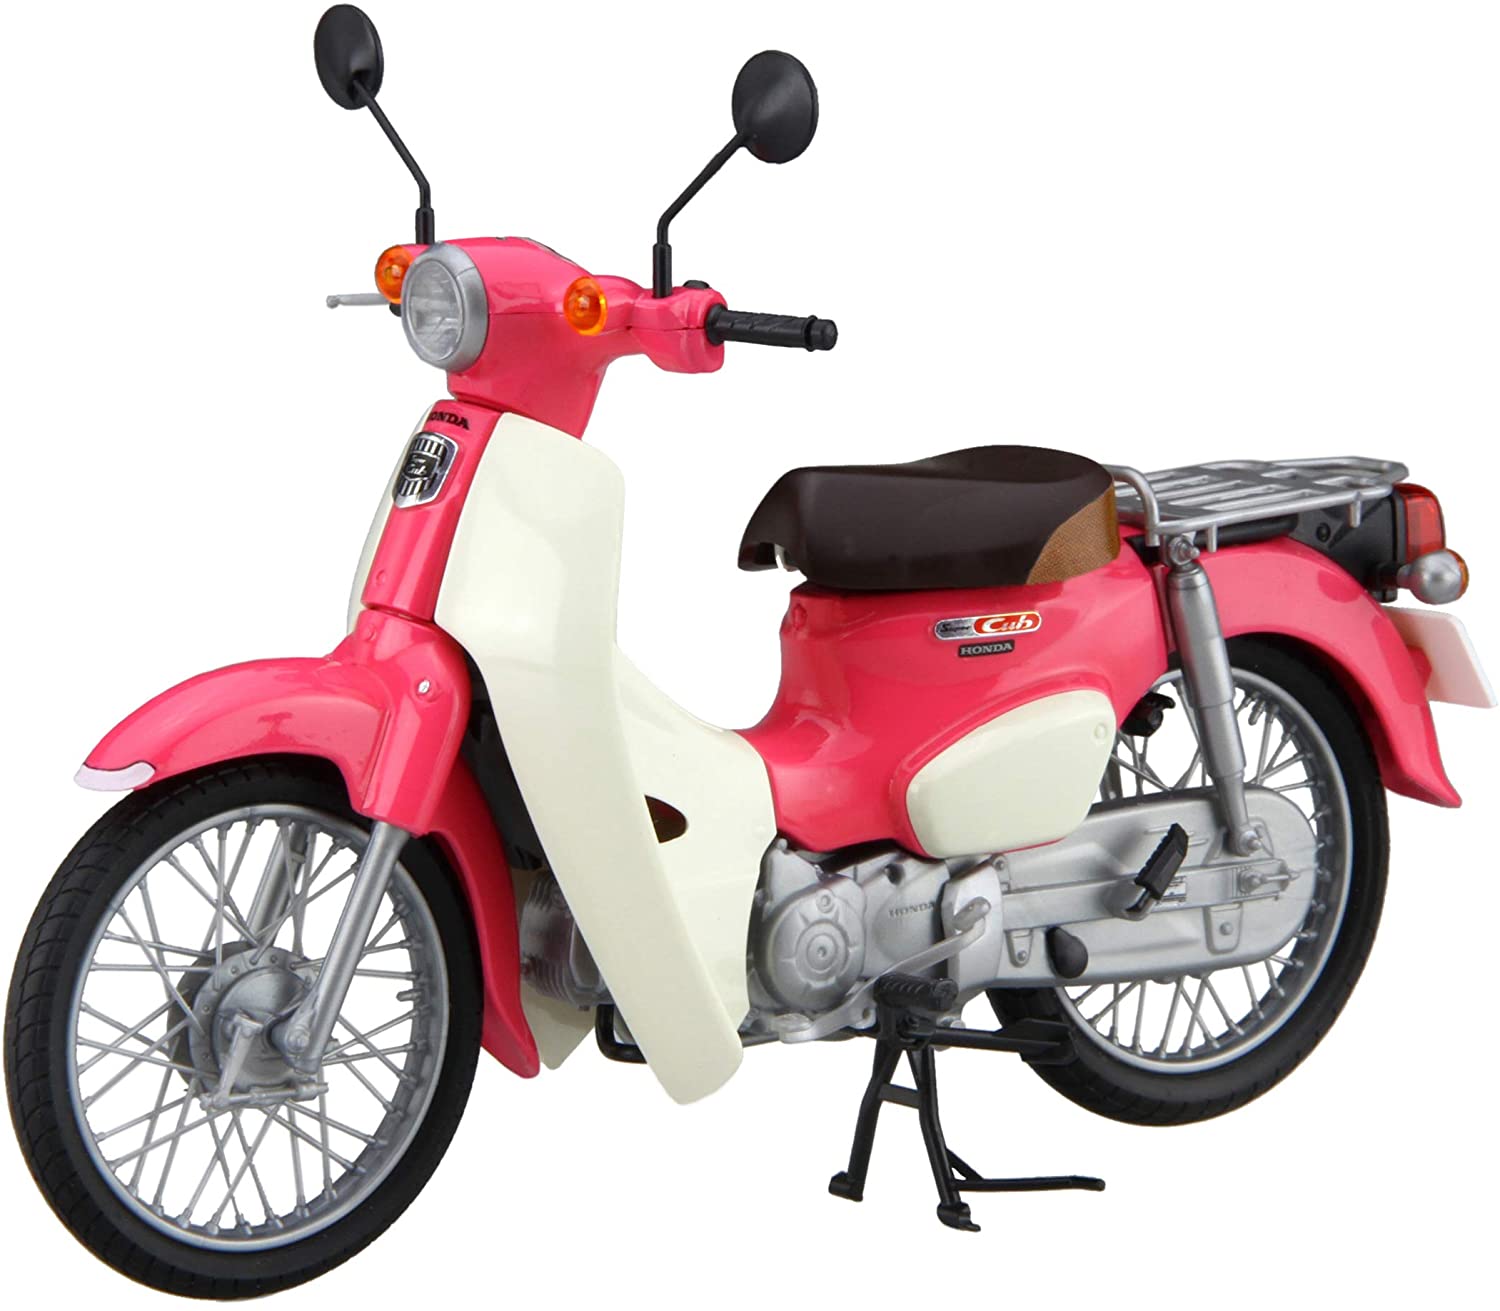 Honda Super Cub110 Weathering with You Ver